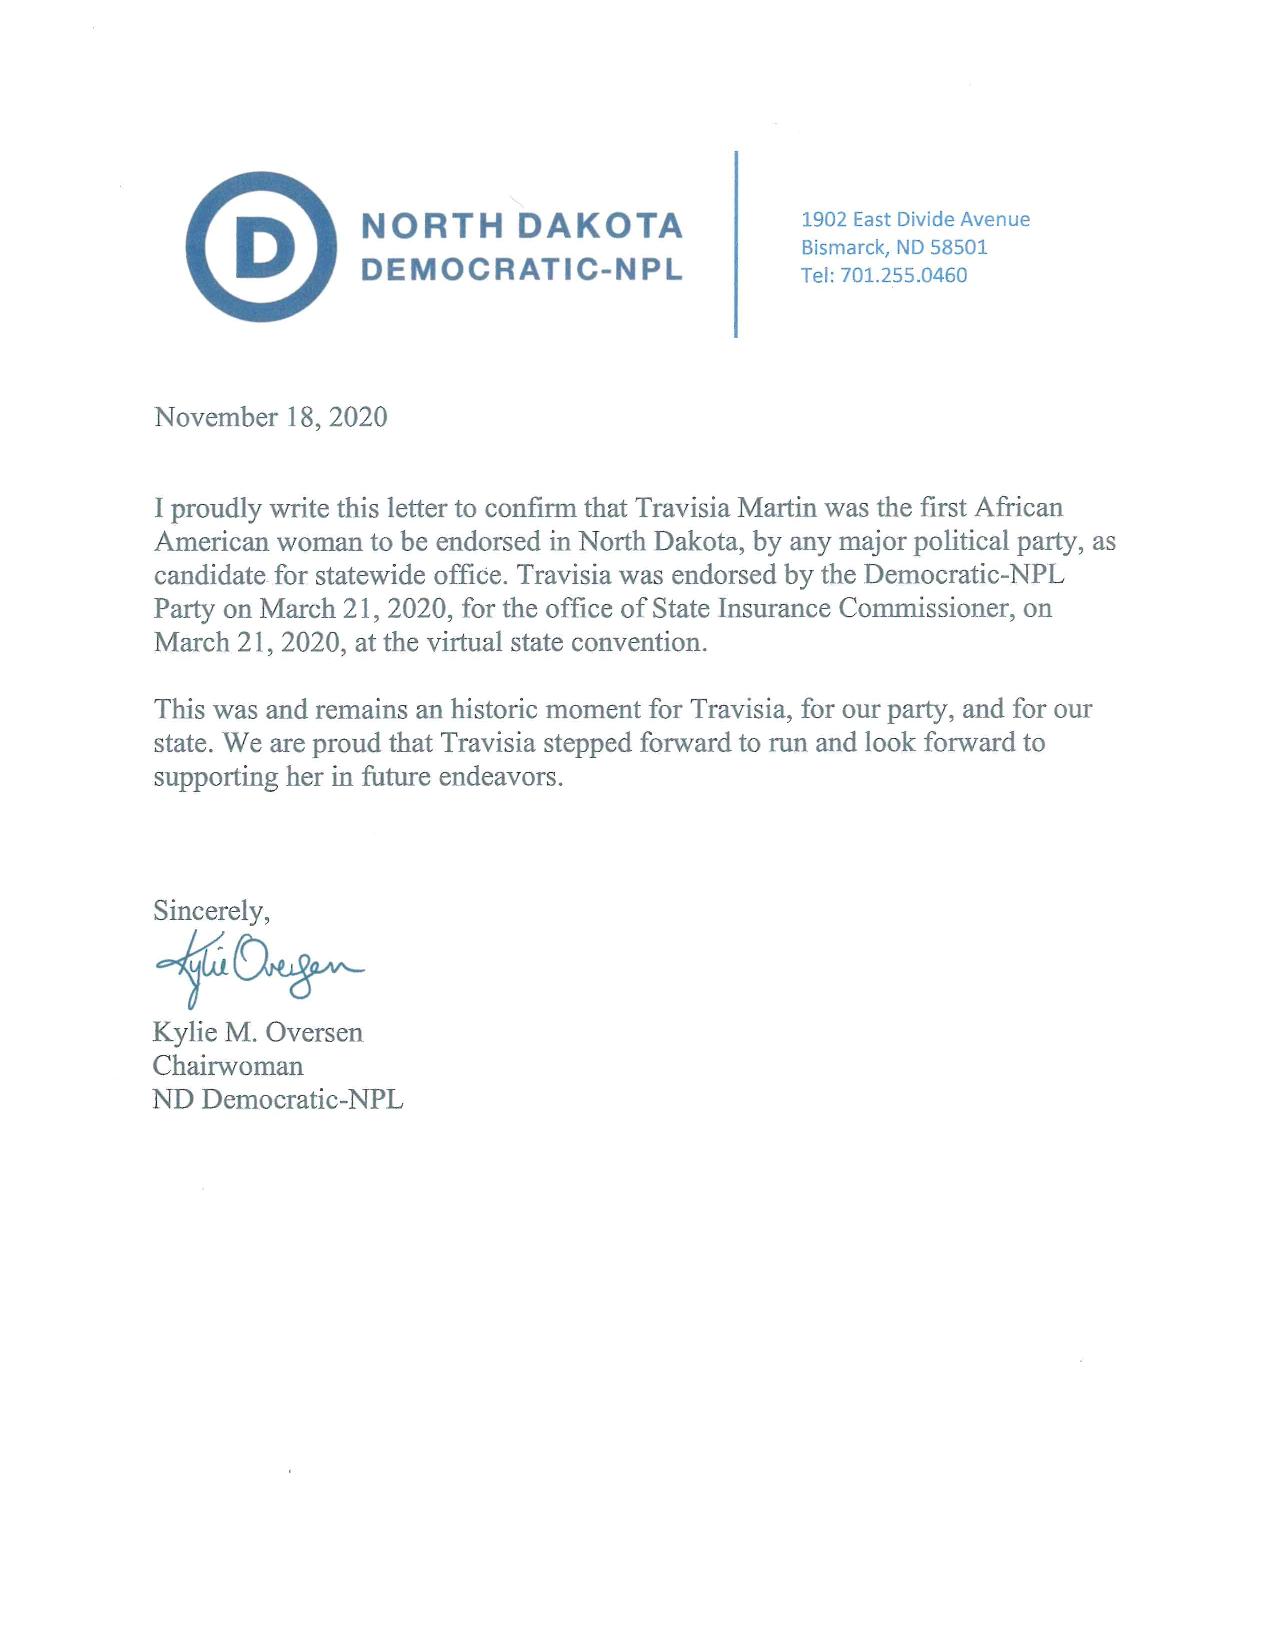 Travisia Martin was the first African American woman to be endorsed by the Democtratic NPL in the state of North Dakota